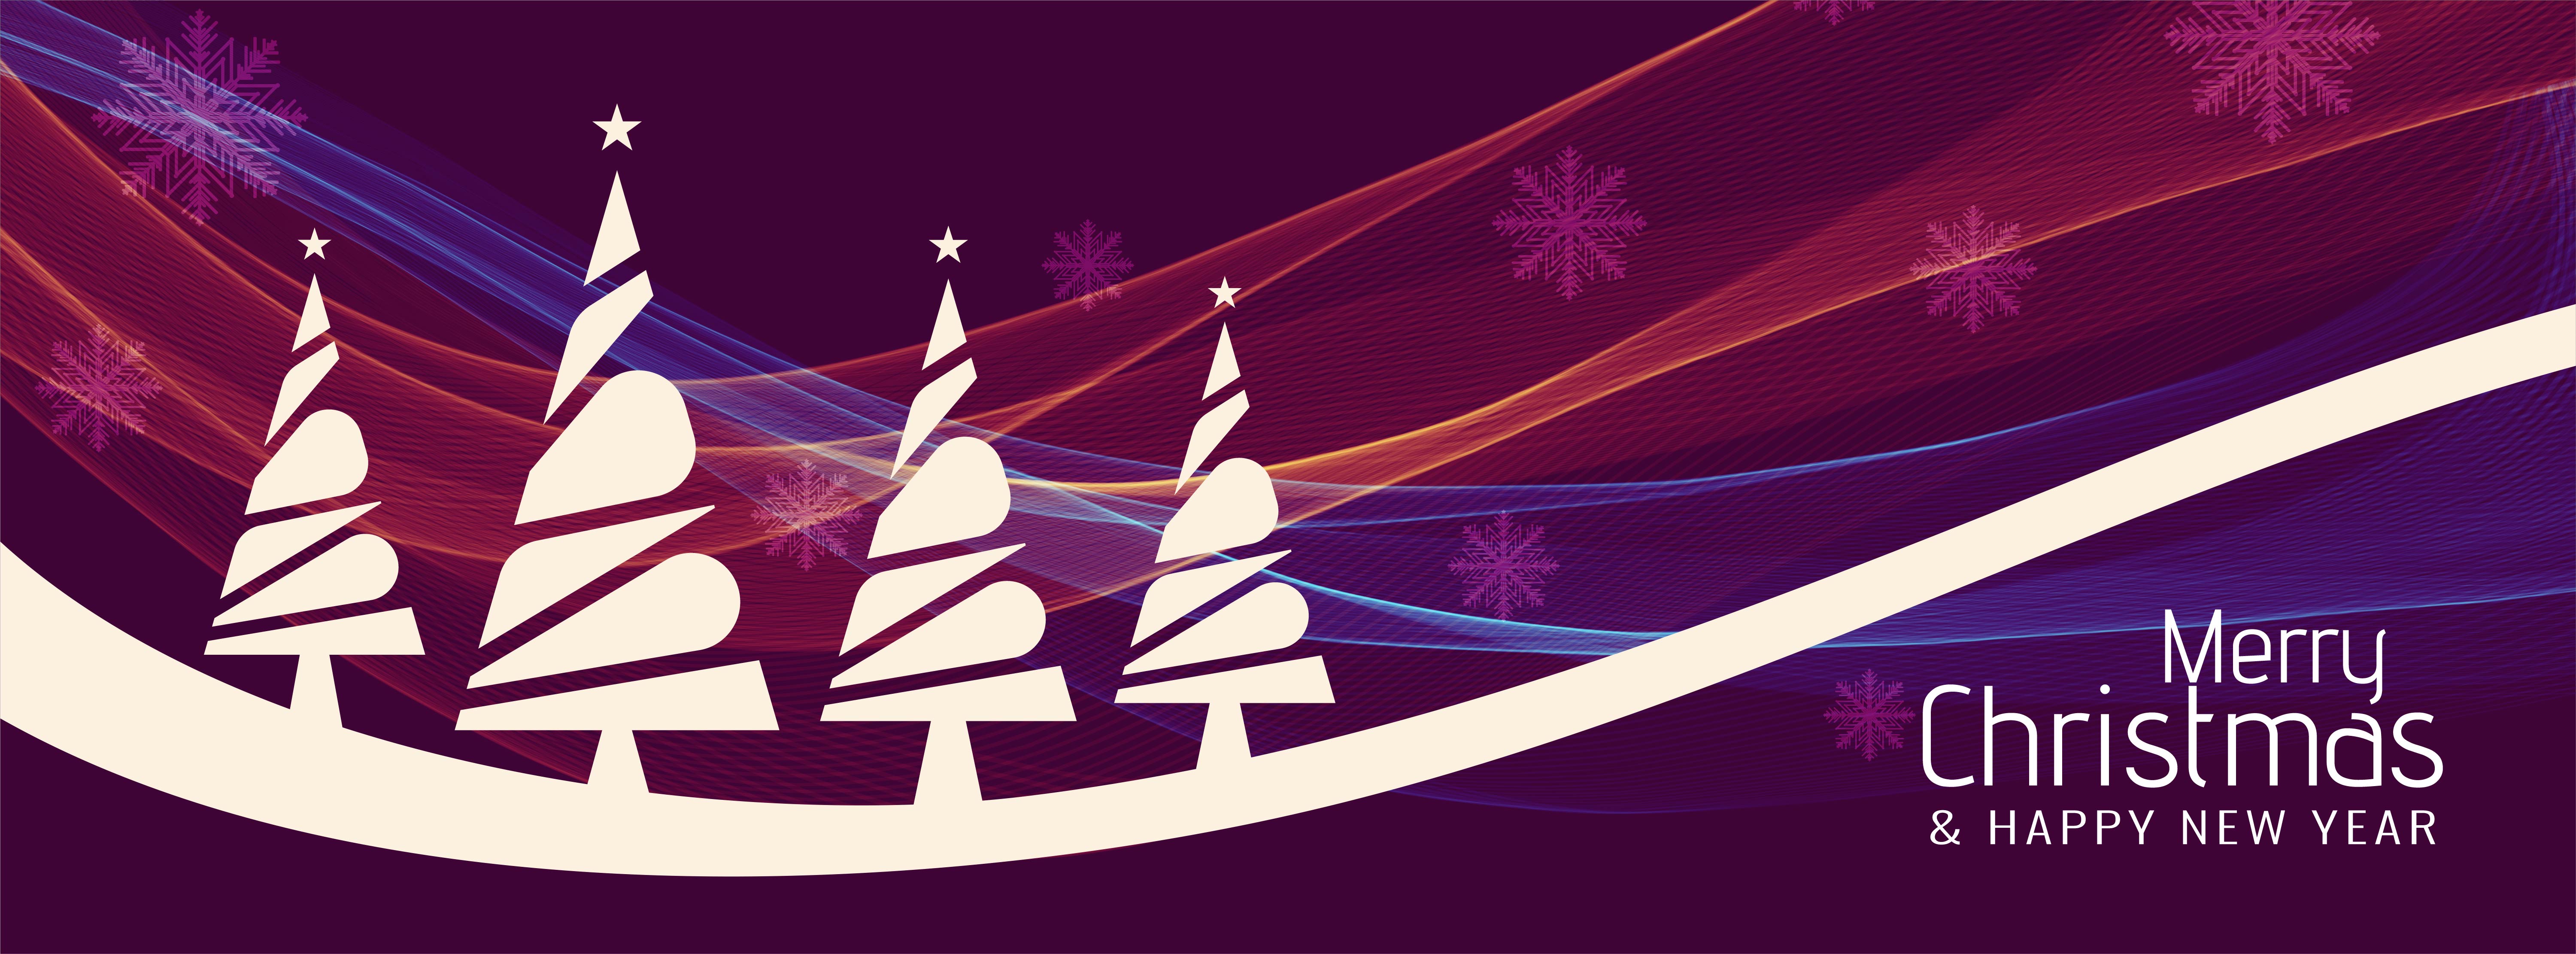 Merry Christmas Banner Template from static.vecteezy.com